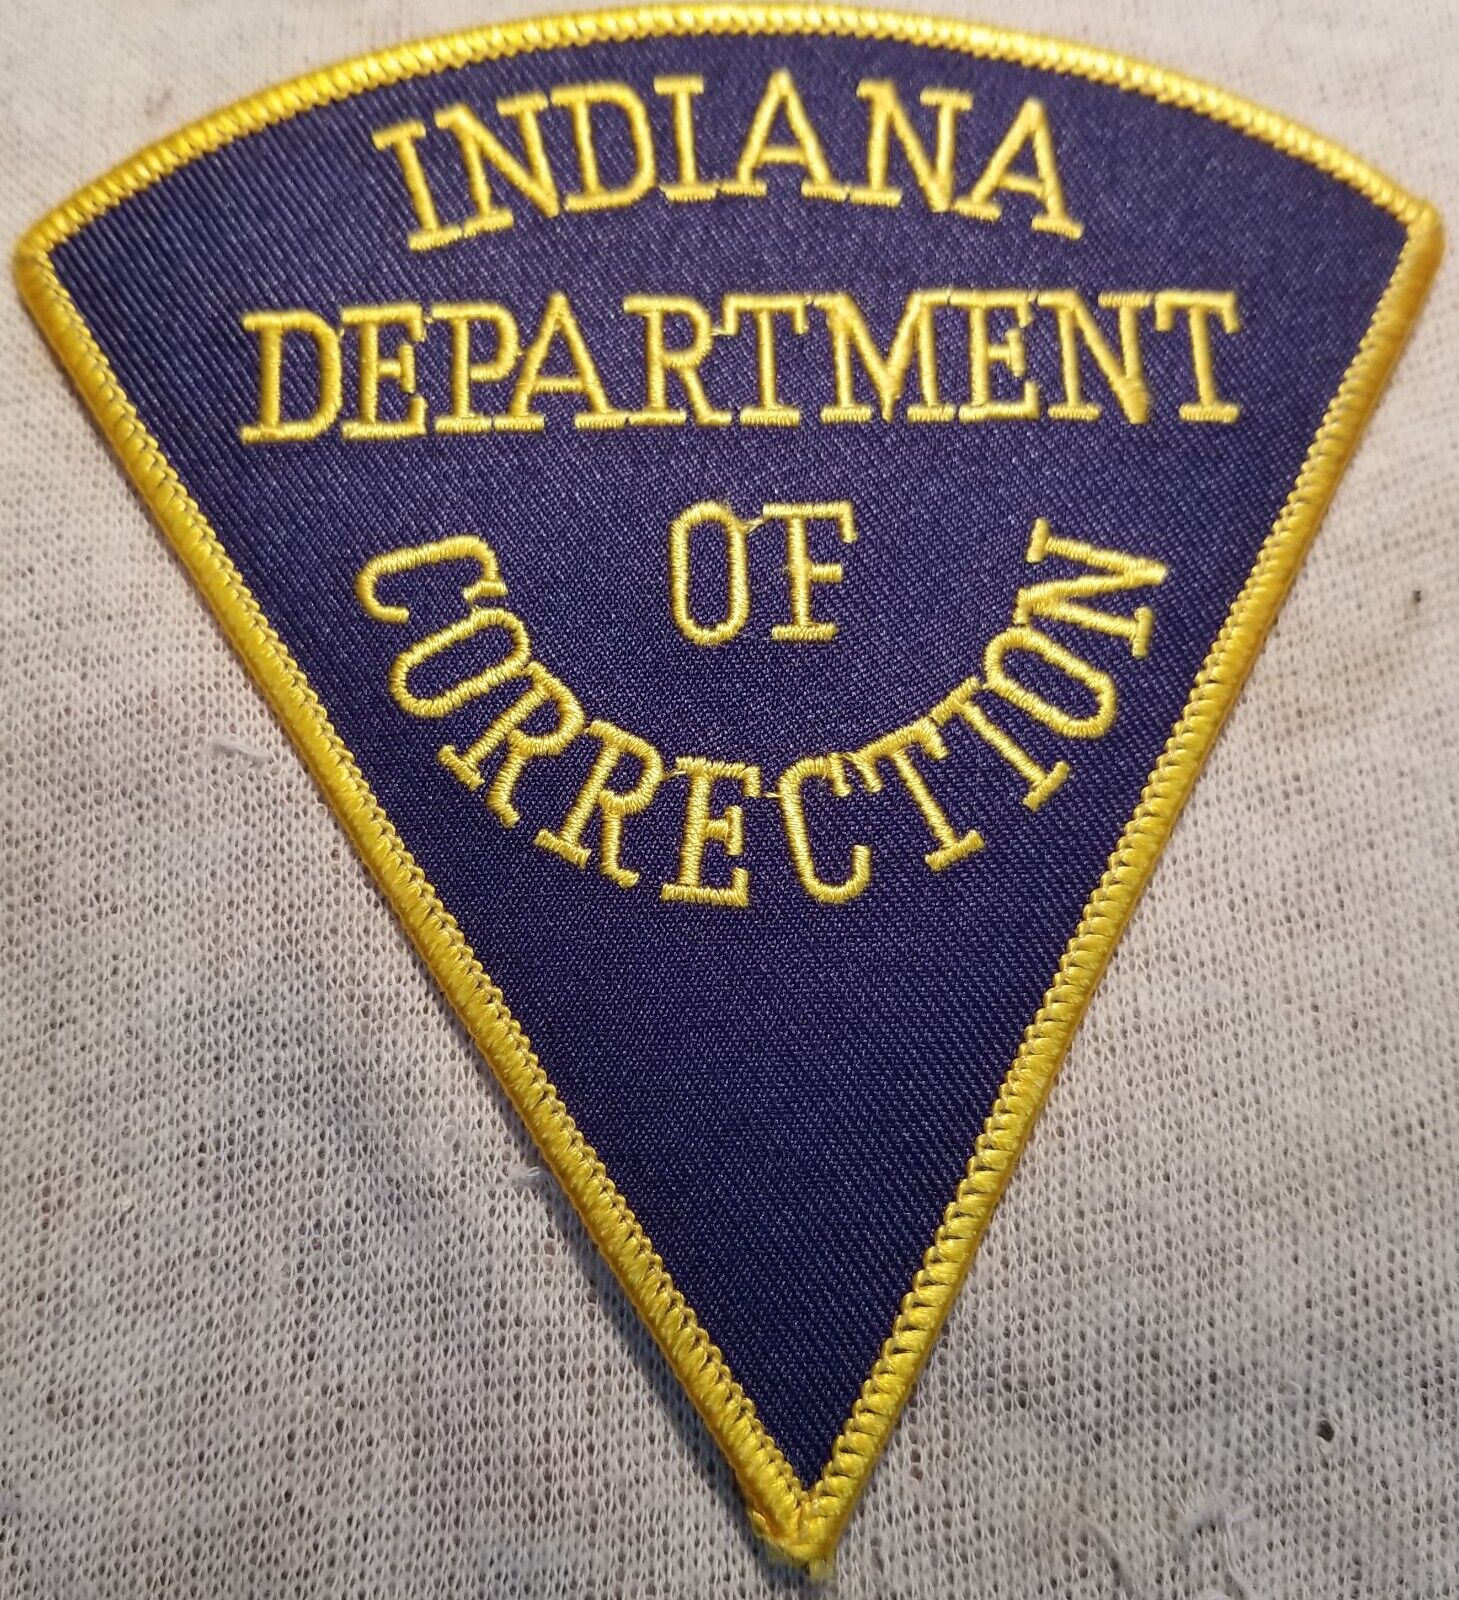 In Indiana Department Of Correction Patch